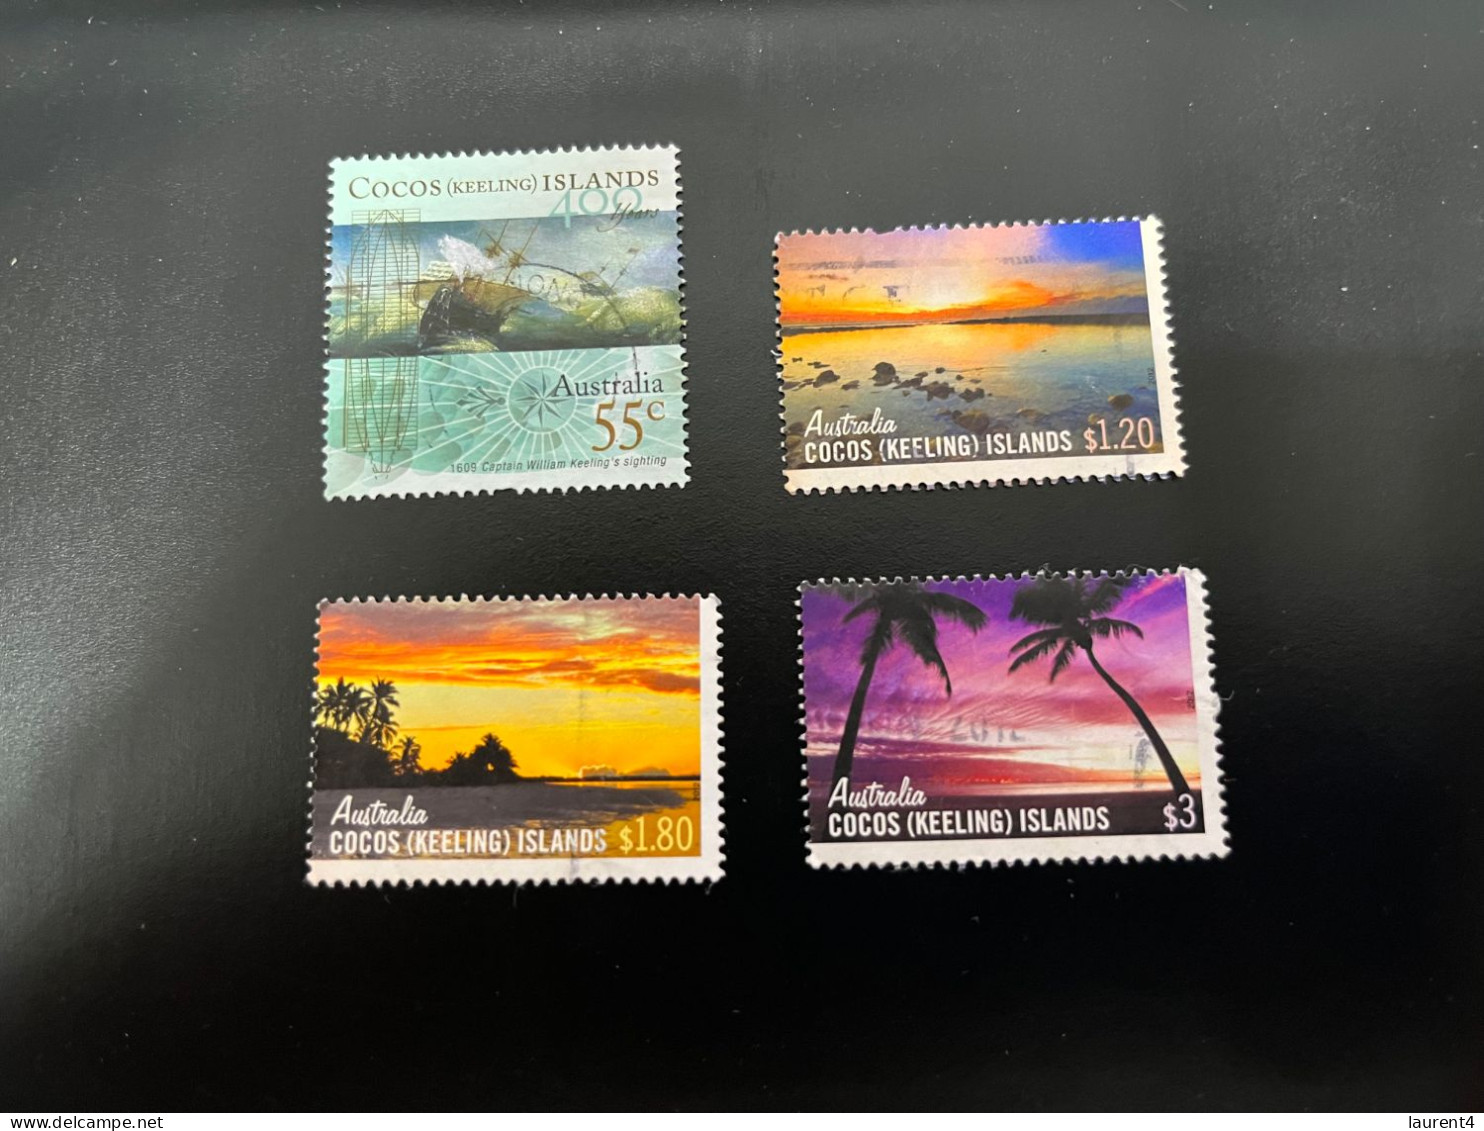 21-10-2023 (stamps) Selection Of Cocos (Keeling) Island Stamps (Australia) - 4 Stamps - Cocos (Keeling) Islands